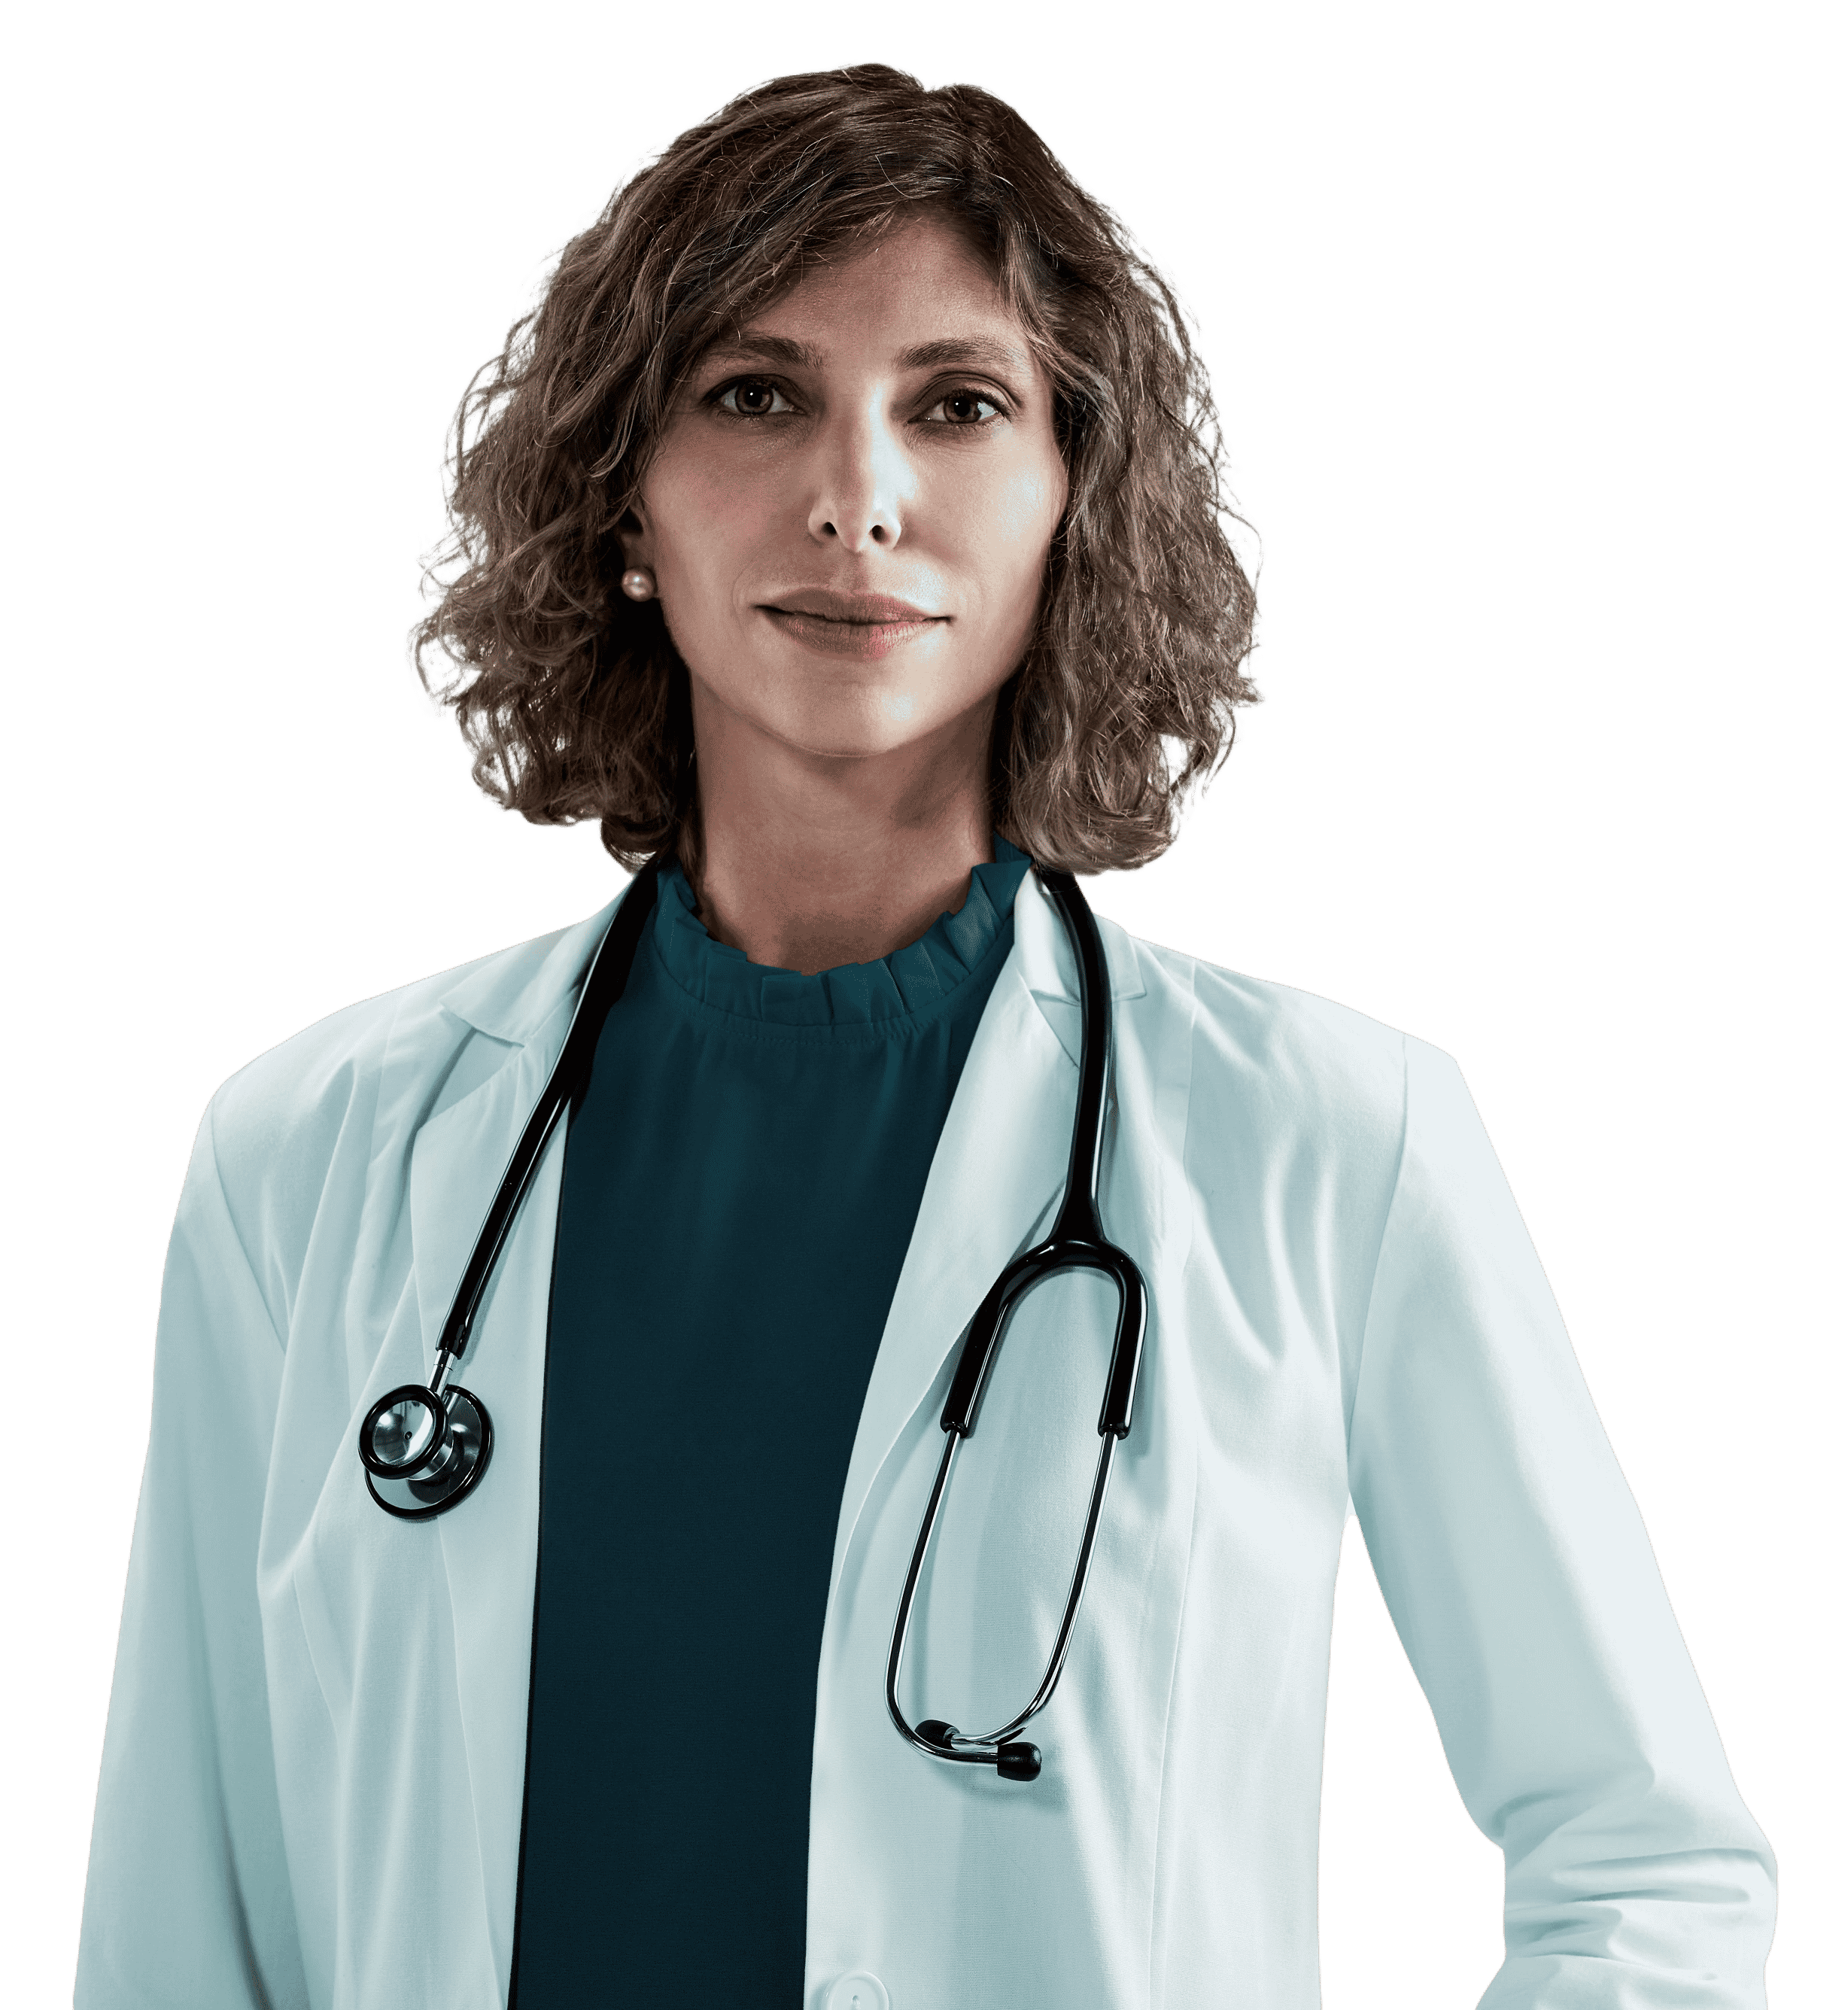 woman doctor picture